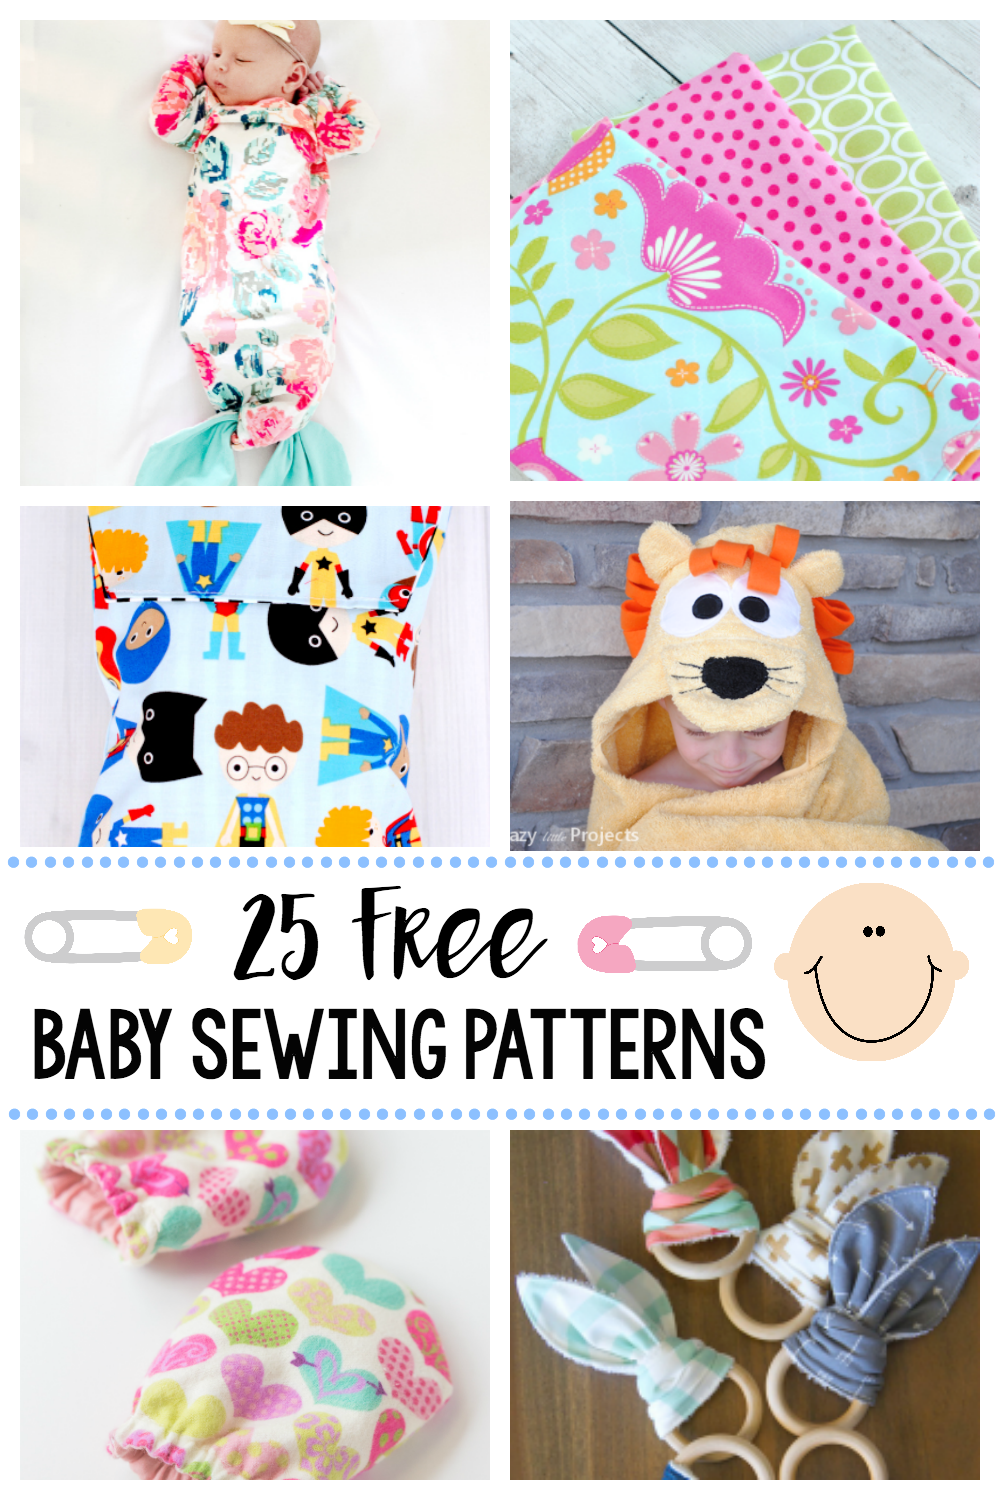 25 Free Baby Sewing Patterns-Great things to sew for baby with these cute patterns. Everything from clothes to burp cloths, great baby gifts and things the new mom will need. #sewing #sewingpatterns #sewingtutorials #freesewingpatterns #baby #thingsforbaby